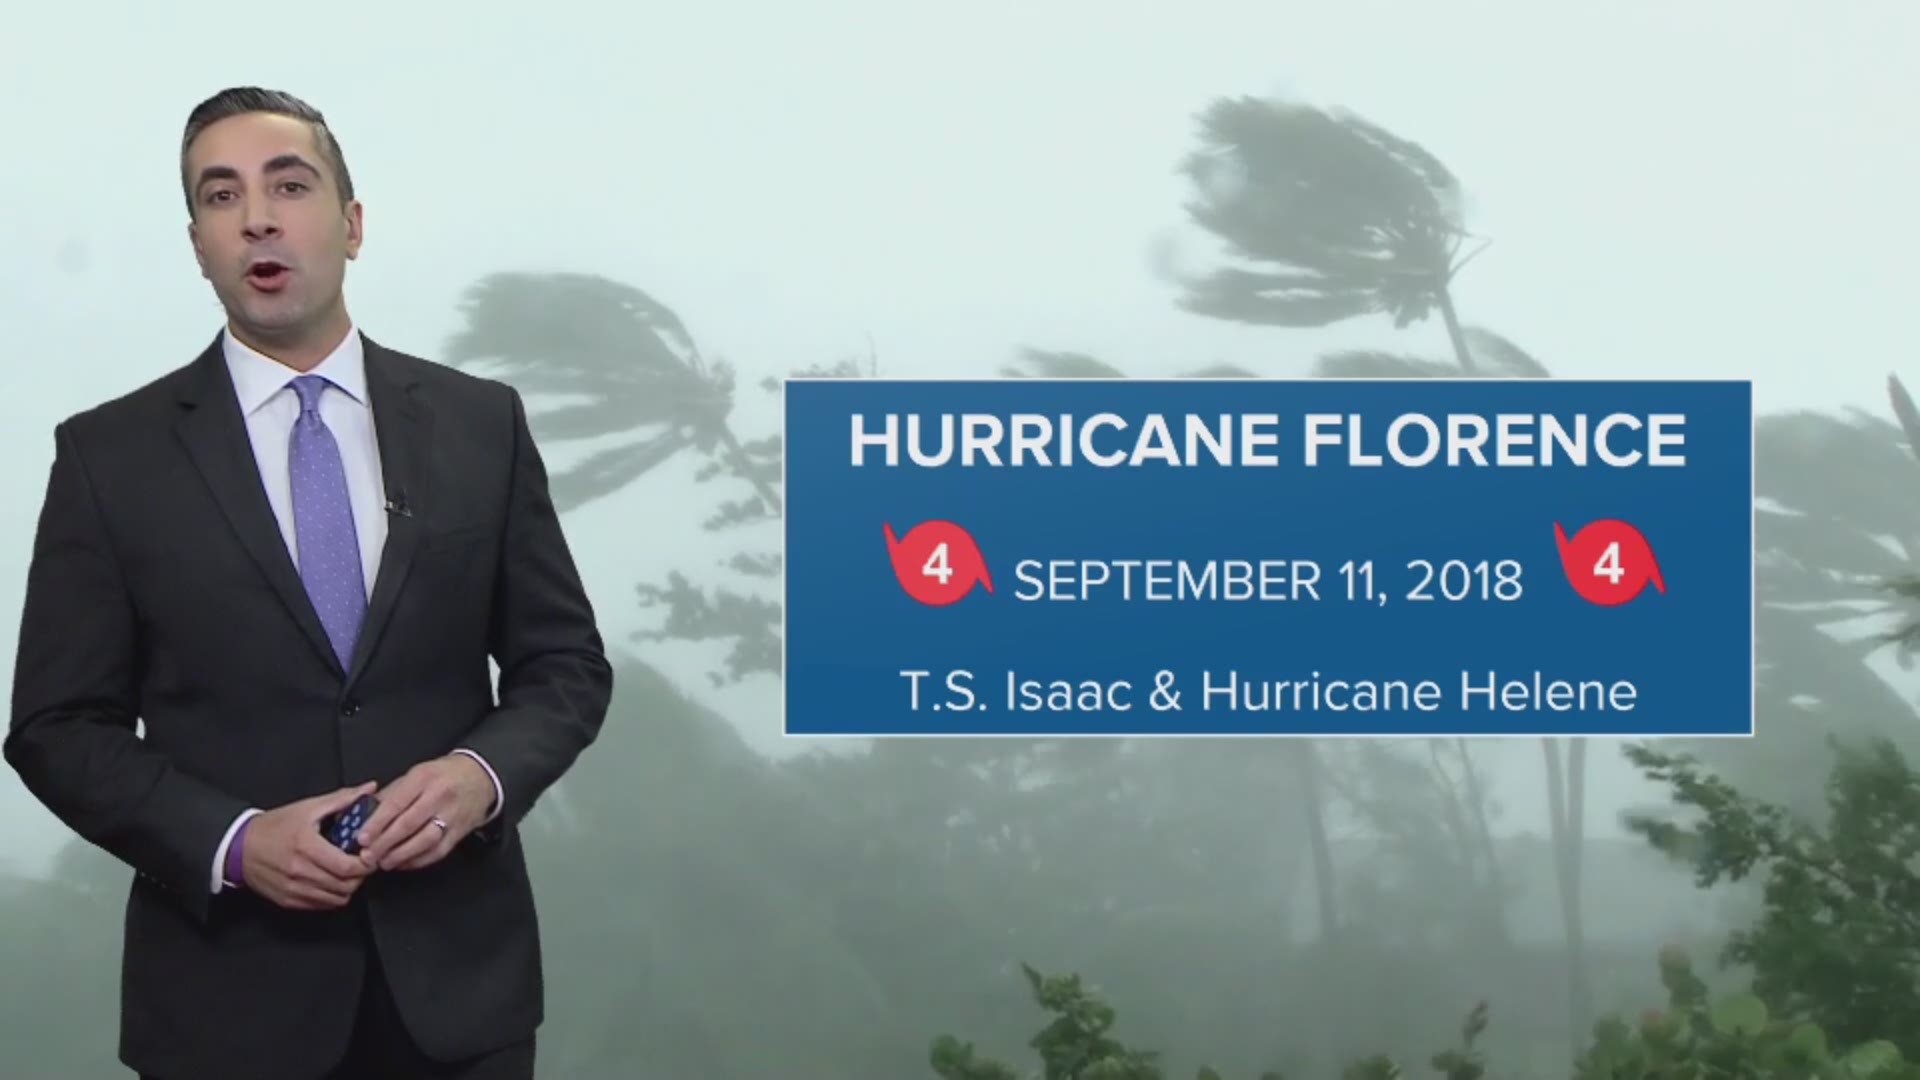 13News Now meteorologist Tim Pandajis takes a look at the latest projected forecast tracks for Hurricane Florence, still a powerful Category 4 storm taking aim at North and South Carolina.